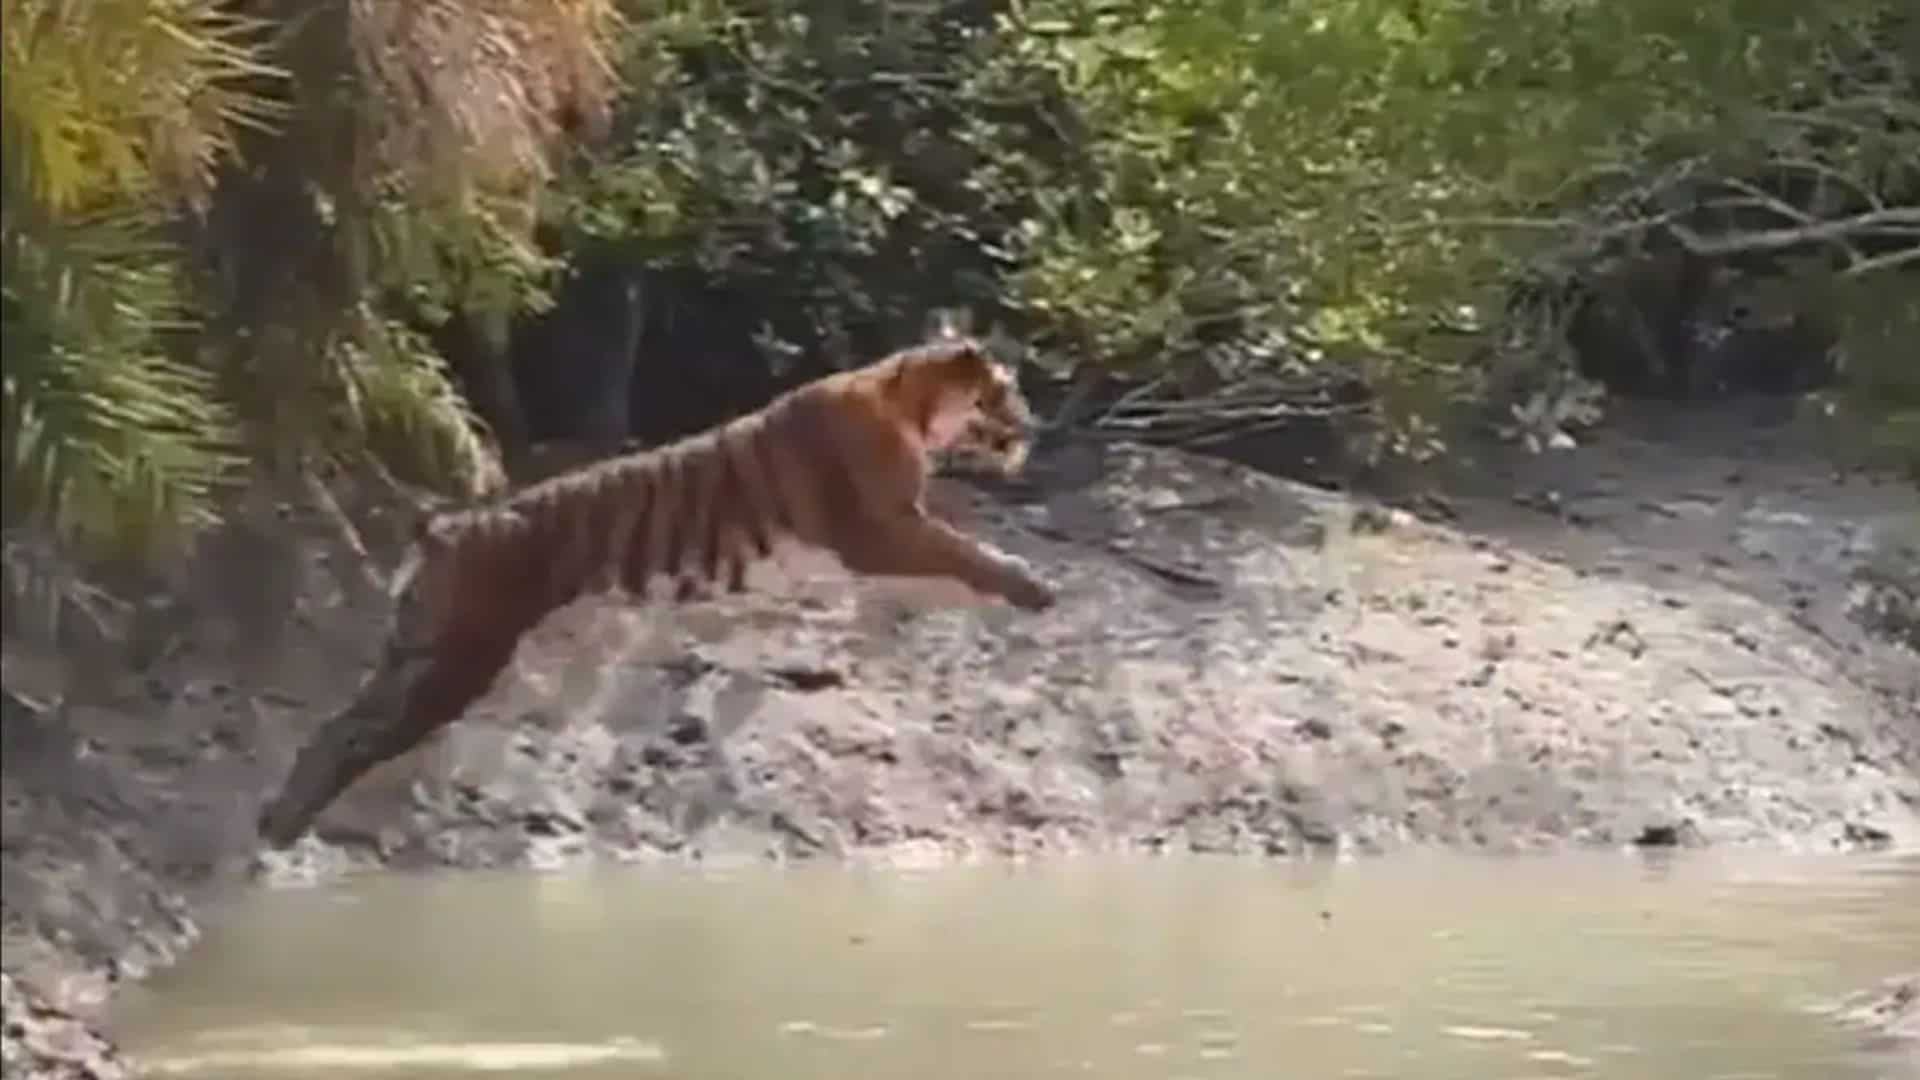 WATCH: Tiger majestically leaps to sinister river in India’s Sundarbans in rare video